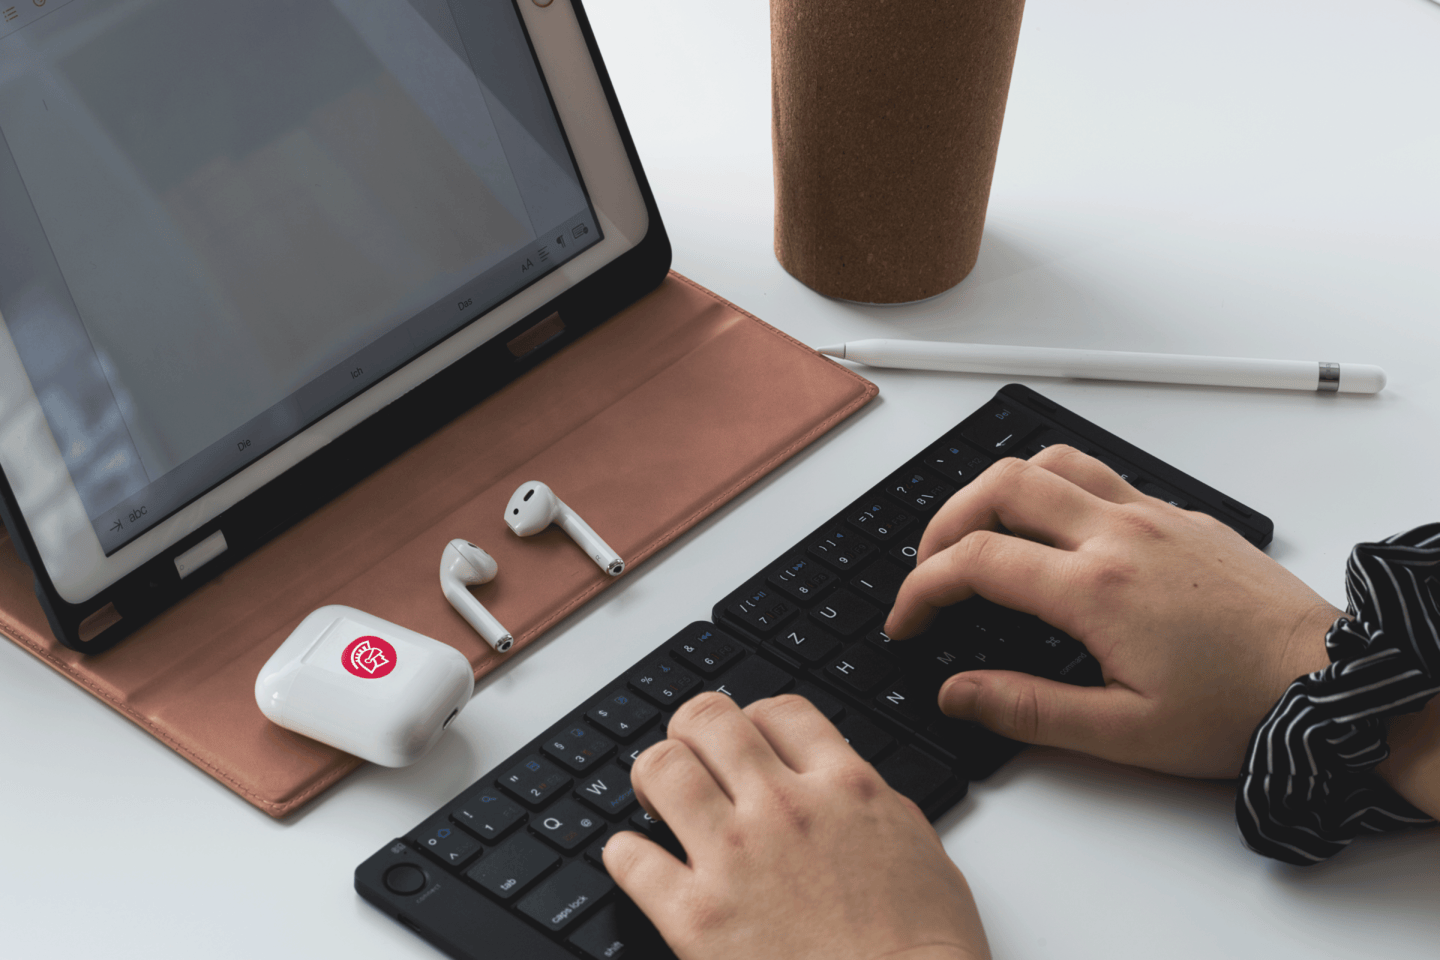 A person types on a keyboard in front of an iPad while Safeguard branded Airpods lay in front of it.